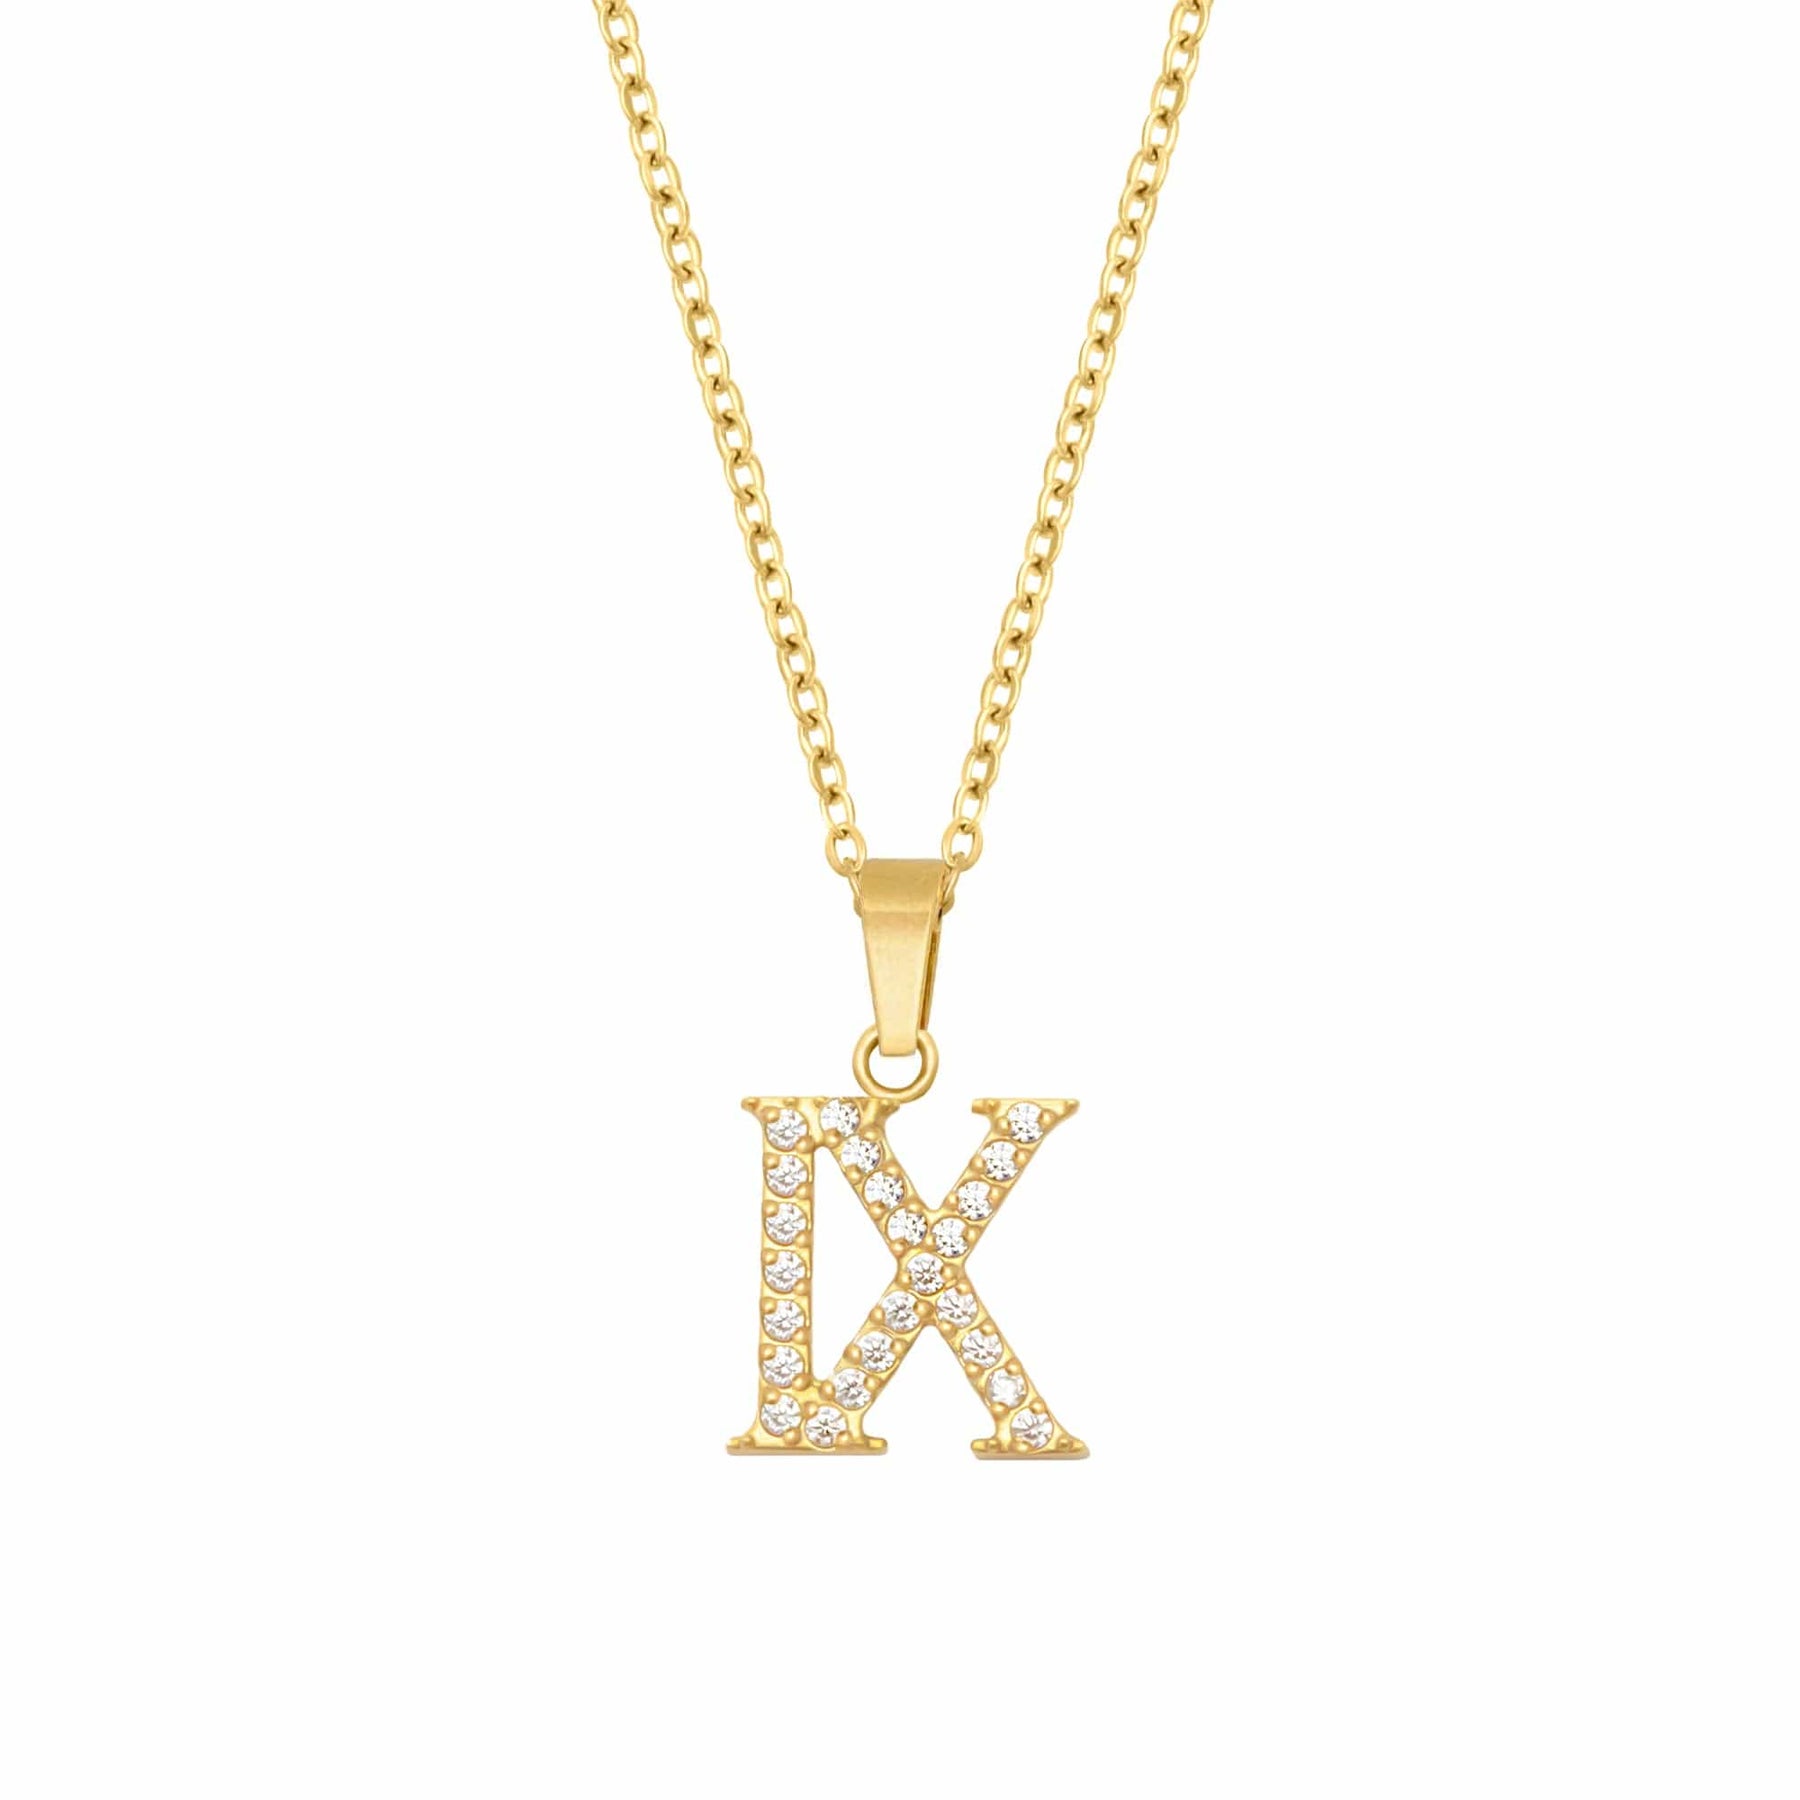 BohoMoon Stainless Steel Roman Numerals Necklace Gold / IX